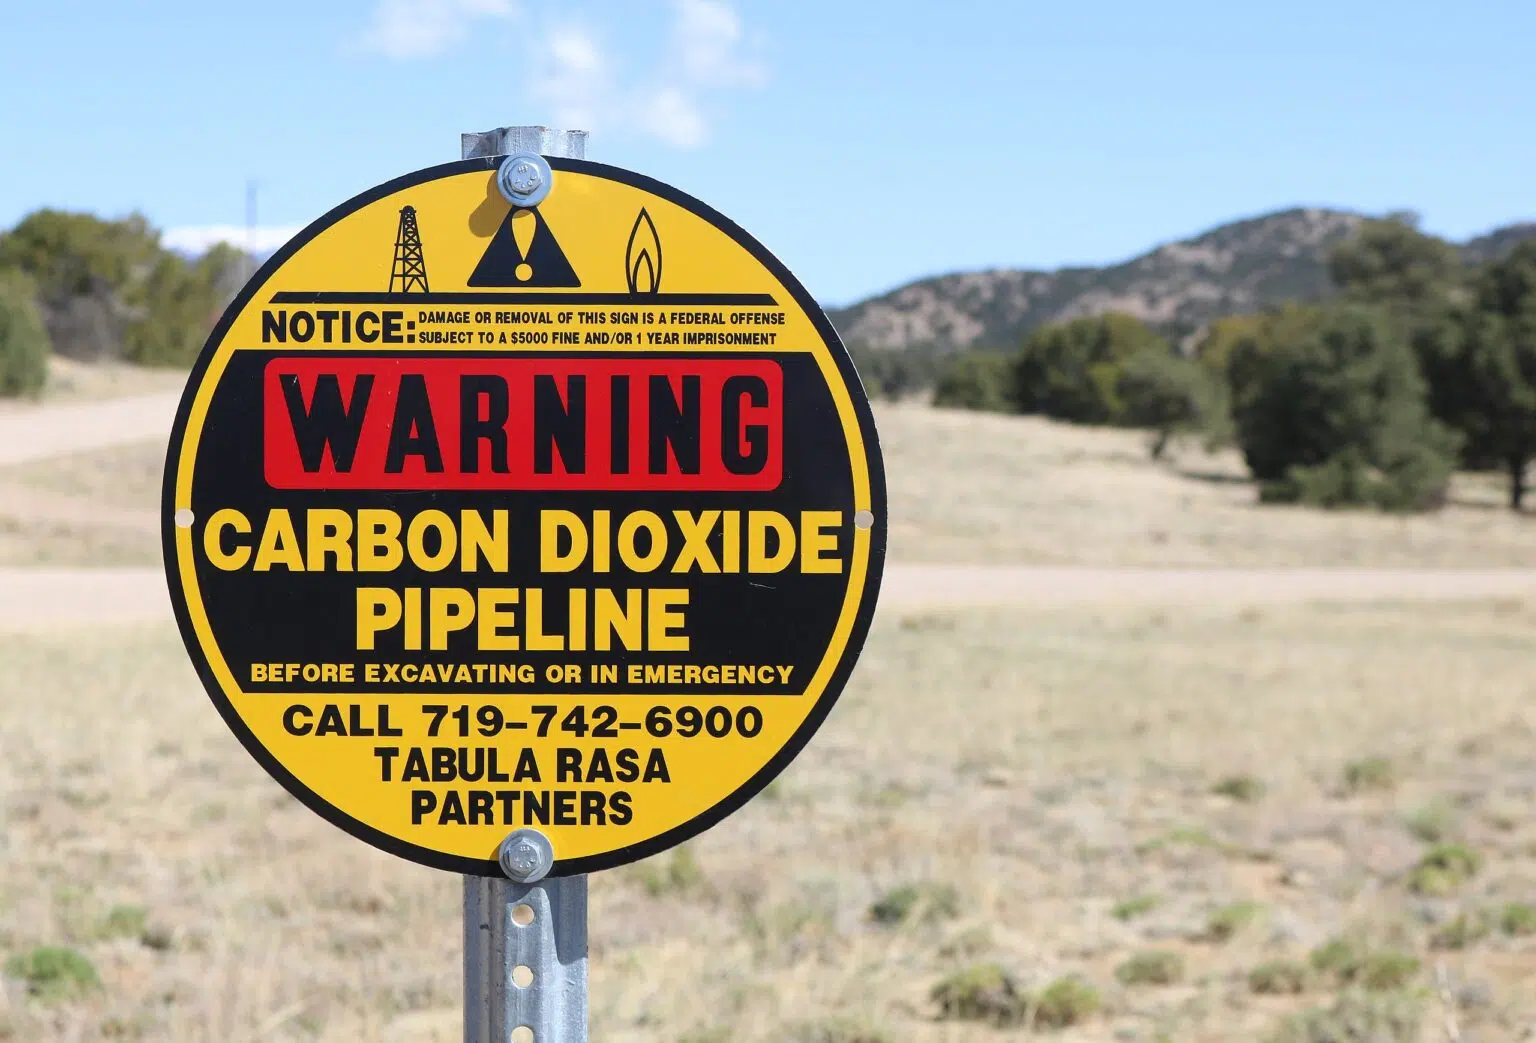 A metal sign warning of a buried carbon dioxide pipeline in Huerfano County, Colorado. Credit: Jeffre Beall, CC BY 4.0